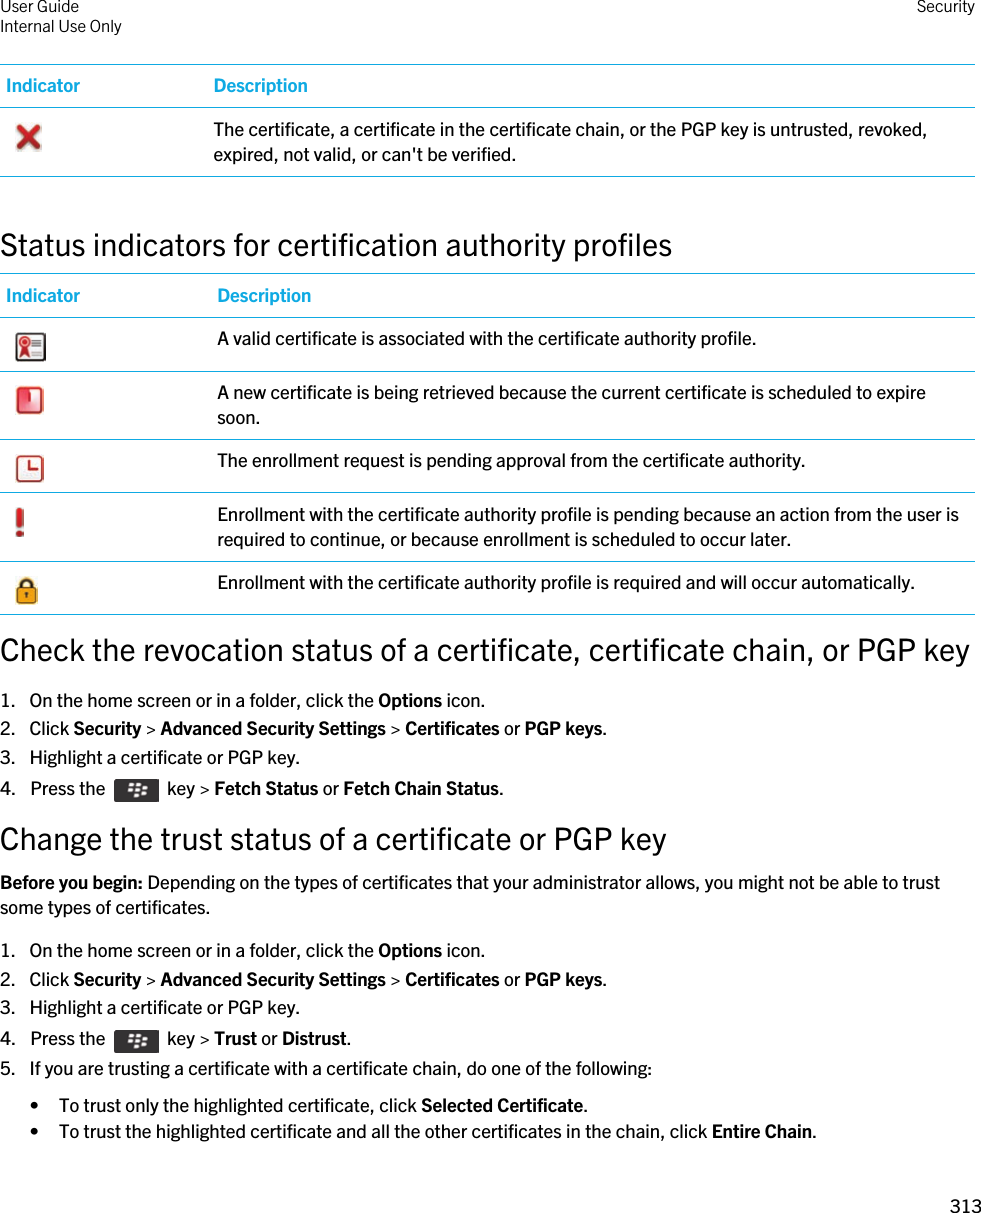 Indicator Description The certificate, a certificate in the certificate chain, or the PGP key is untrusted, revoked, expired, not valid, or can&apos;t be verified.Status indicators for certification authority profilesIndicator Description A valid certificate is associated with the certificate authority profile. A new certificate is being retrieved because the current certificate is scheduled to expire soon. The enrollment request is pending approval from the certificate authority. Enrollment with the certificate authority profile is pending because an action from the user is required to continue, or because enrollment is scheduled to occur later. Enrollment with the certificate authority profile is required and will occur automatically.Check the revocation status of a certificate, certificate chain, or PGP key1. On the home screen or in a folder, click the Options icon.2. Click Security &gt; Advanced Security Settings &gt; Certificates or PGP keys.3. Highlight a certificate or PGP key.4.  Press the    key &gt; Fetch Status or Fetch Chain Status. Change the trust status of a certificate or PGP keyBefore you begin: Depending on the types of certificates that your administrator allows, you might not be able to trust some types of certificates.1. On the home screen or in a folder, click the Options icon.2. Click Security &gt; Advanced Security Settings &gt; Certificates or PGP keys.3. Highlight a certificate or PGP key.4.  Press the    key &gt; Trust or Distrust. 5. If you are trusting a certificate with a certificate chain, do one of the following:• To trust only the highlighted certificate, click Selected Certificate.• To trust the highlighted certificate and all the other certificates in the chain, click Entire Chain.User GuideInternal Use Only Security313 